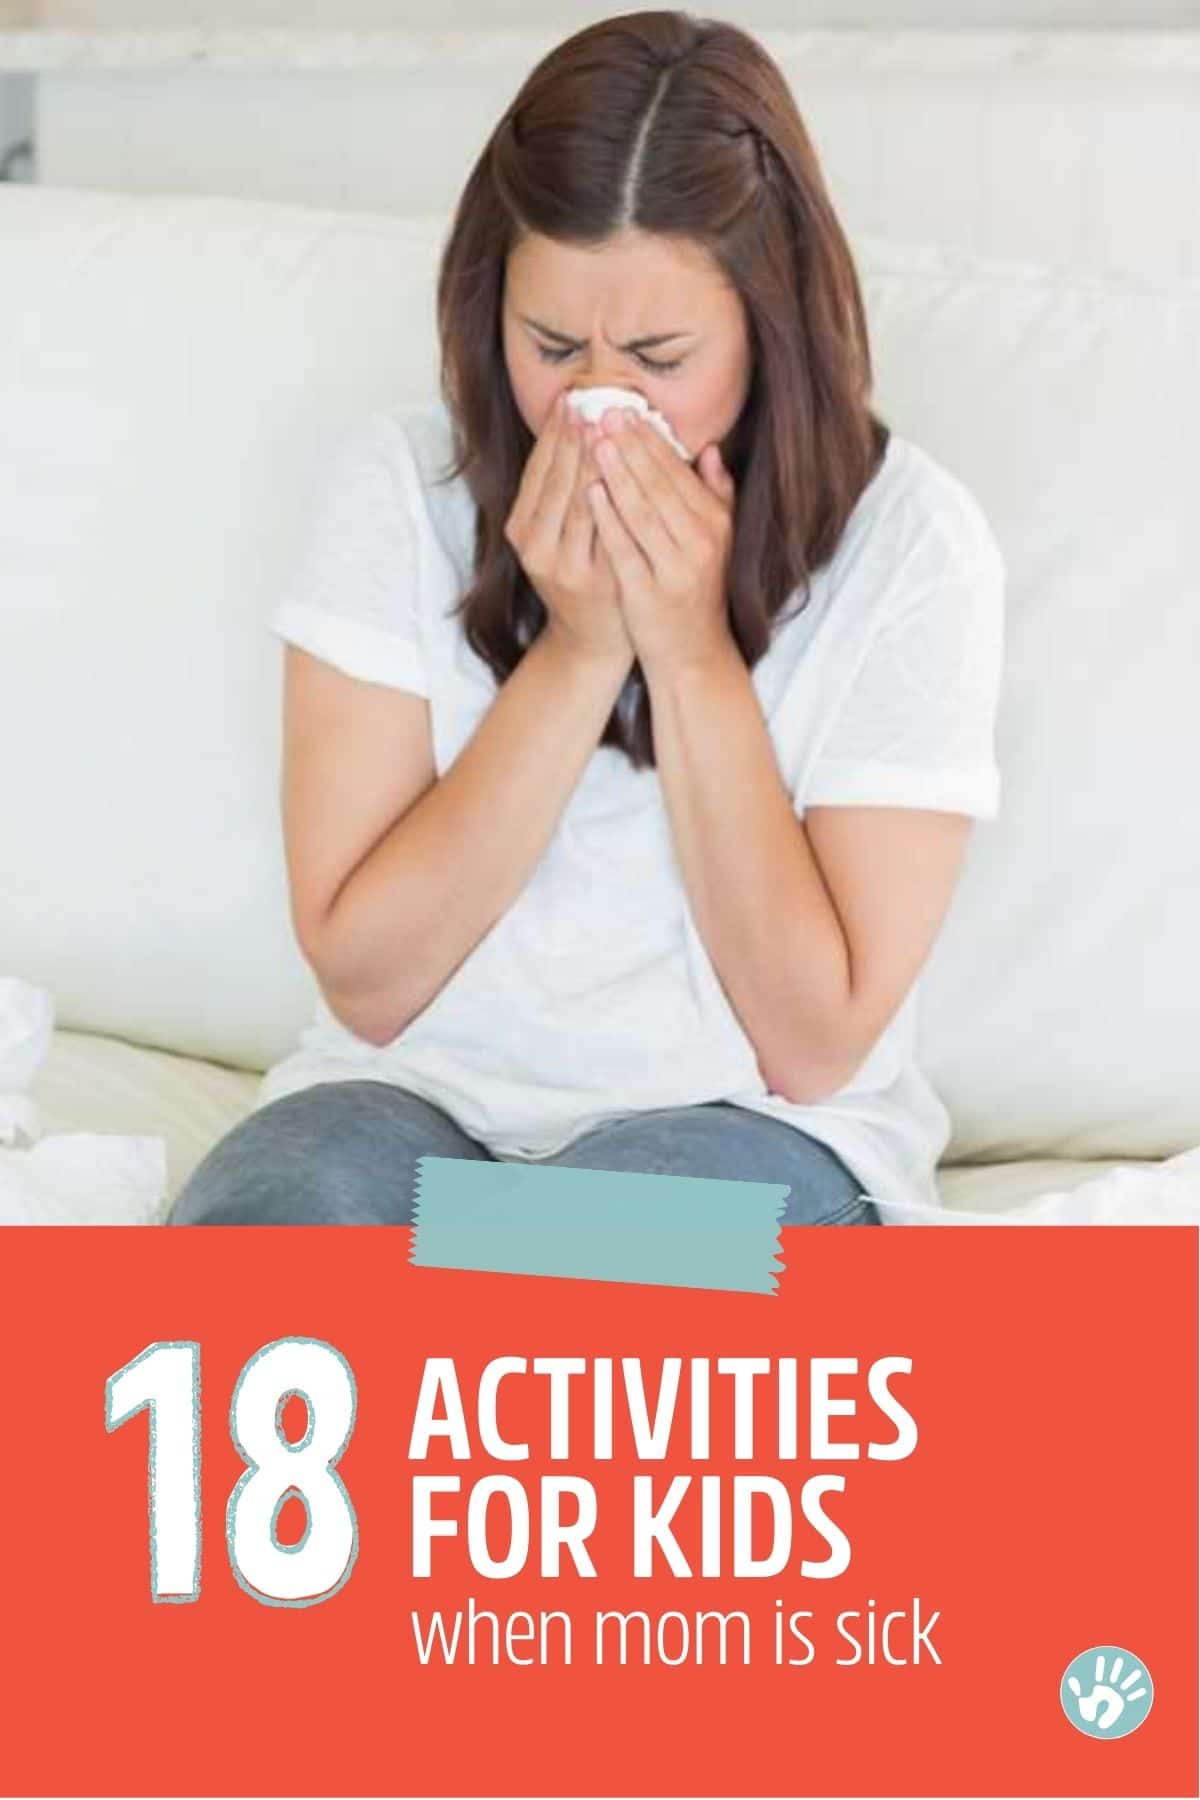 Uh-oh, Mom is sick! 18 low energy (no prep activities) you can have the kids do from the couch when you're sick.